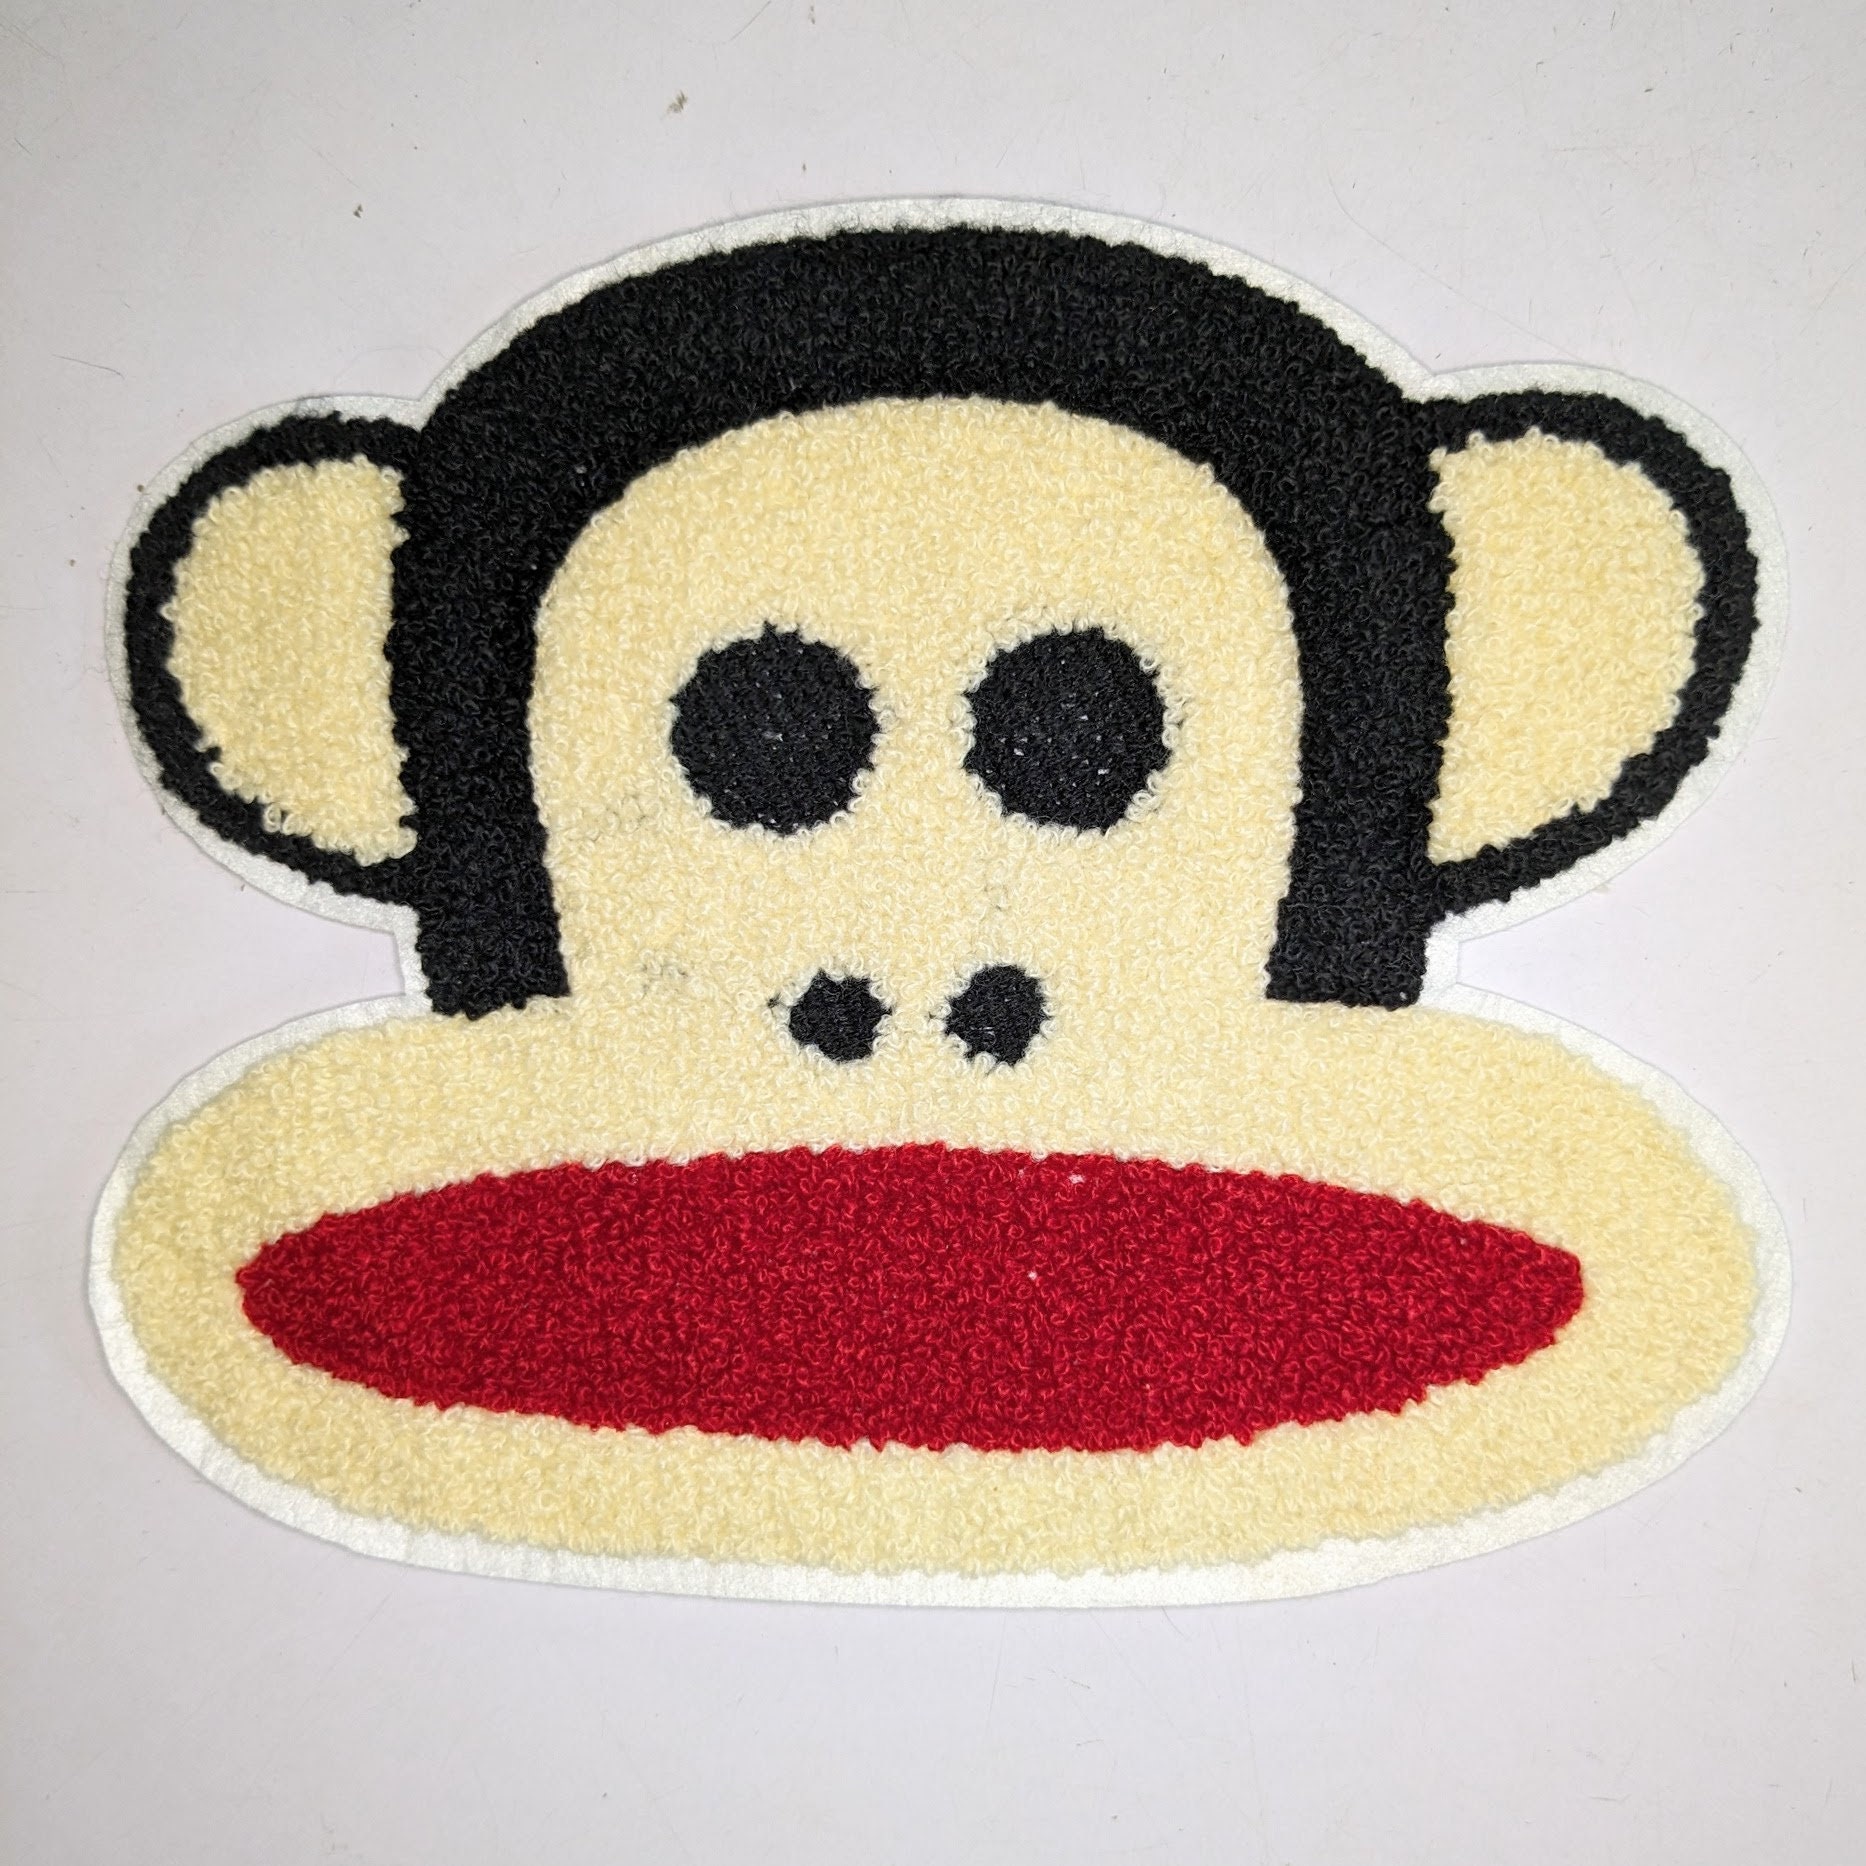 Not My Circus Not My Monkeys Patch Made in USA 3 X 